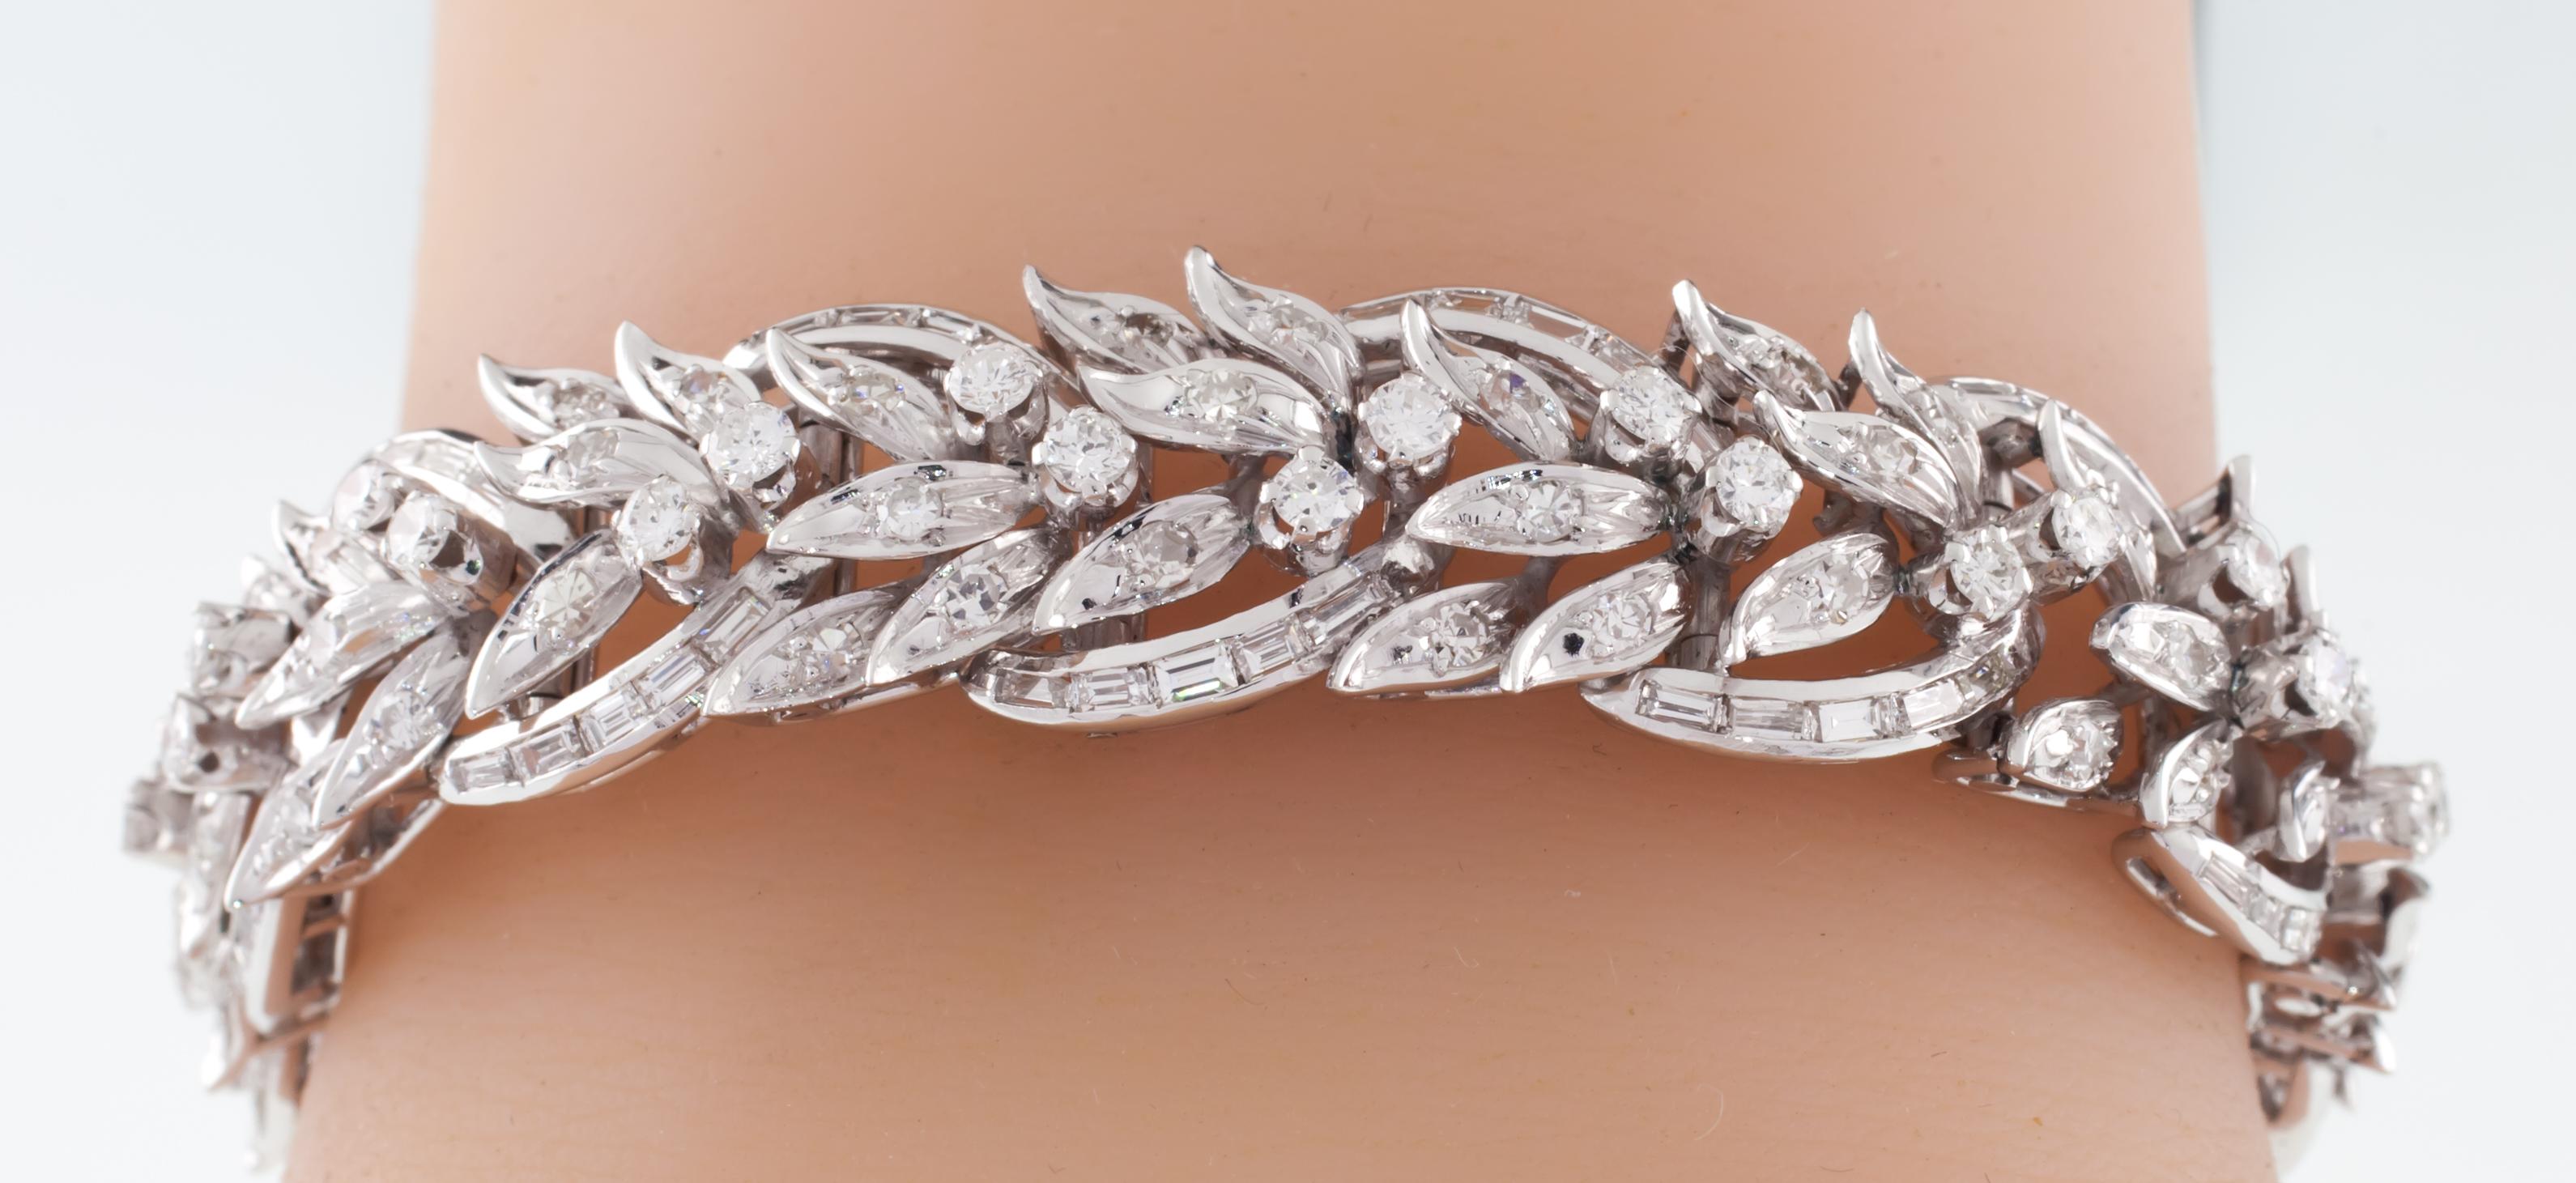 Gorgeous Platinum Diamond Bracelet
Features Round and Baguette Diamonds in Intricate Floral/Leaf Design
Outer Petals Set w/ Channel Set Baguettes
Inner Petals Set w/ Pave Round Diamonds
Prong-Set Round Diamond Accents
Total Diamond Weight = 6.50